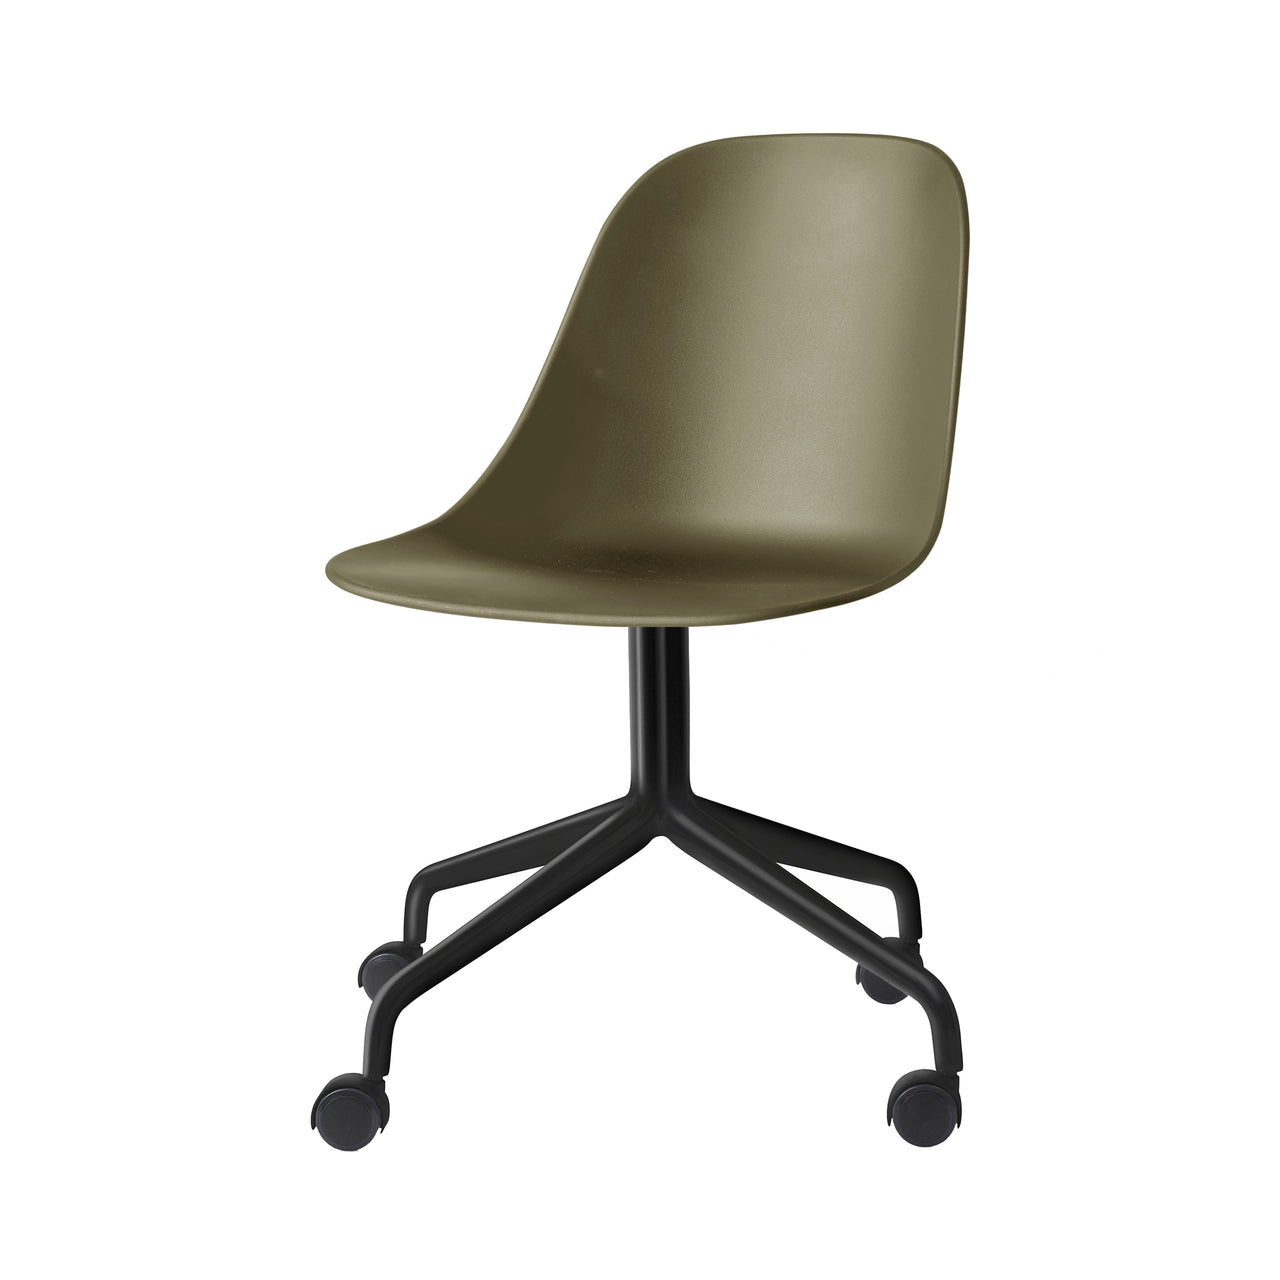 Harbour Side Chair Star Base with Casters: Olive